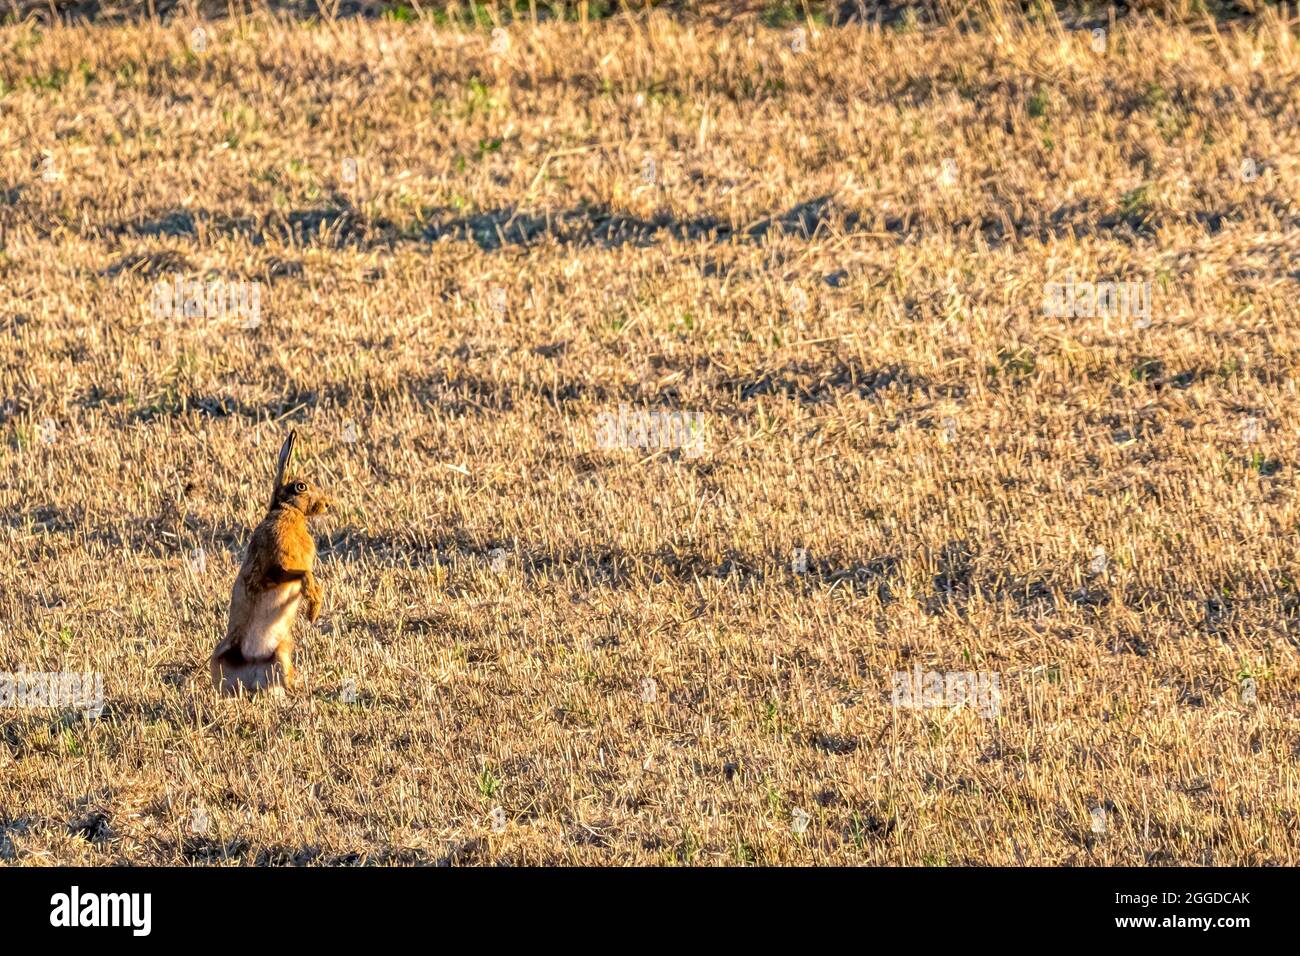 European hare, Lepus europaeus, standing on hind legs to look across a field of stubble immediately after harvest. Stock Photo